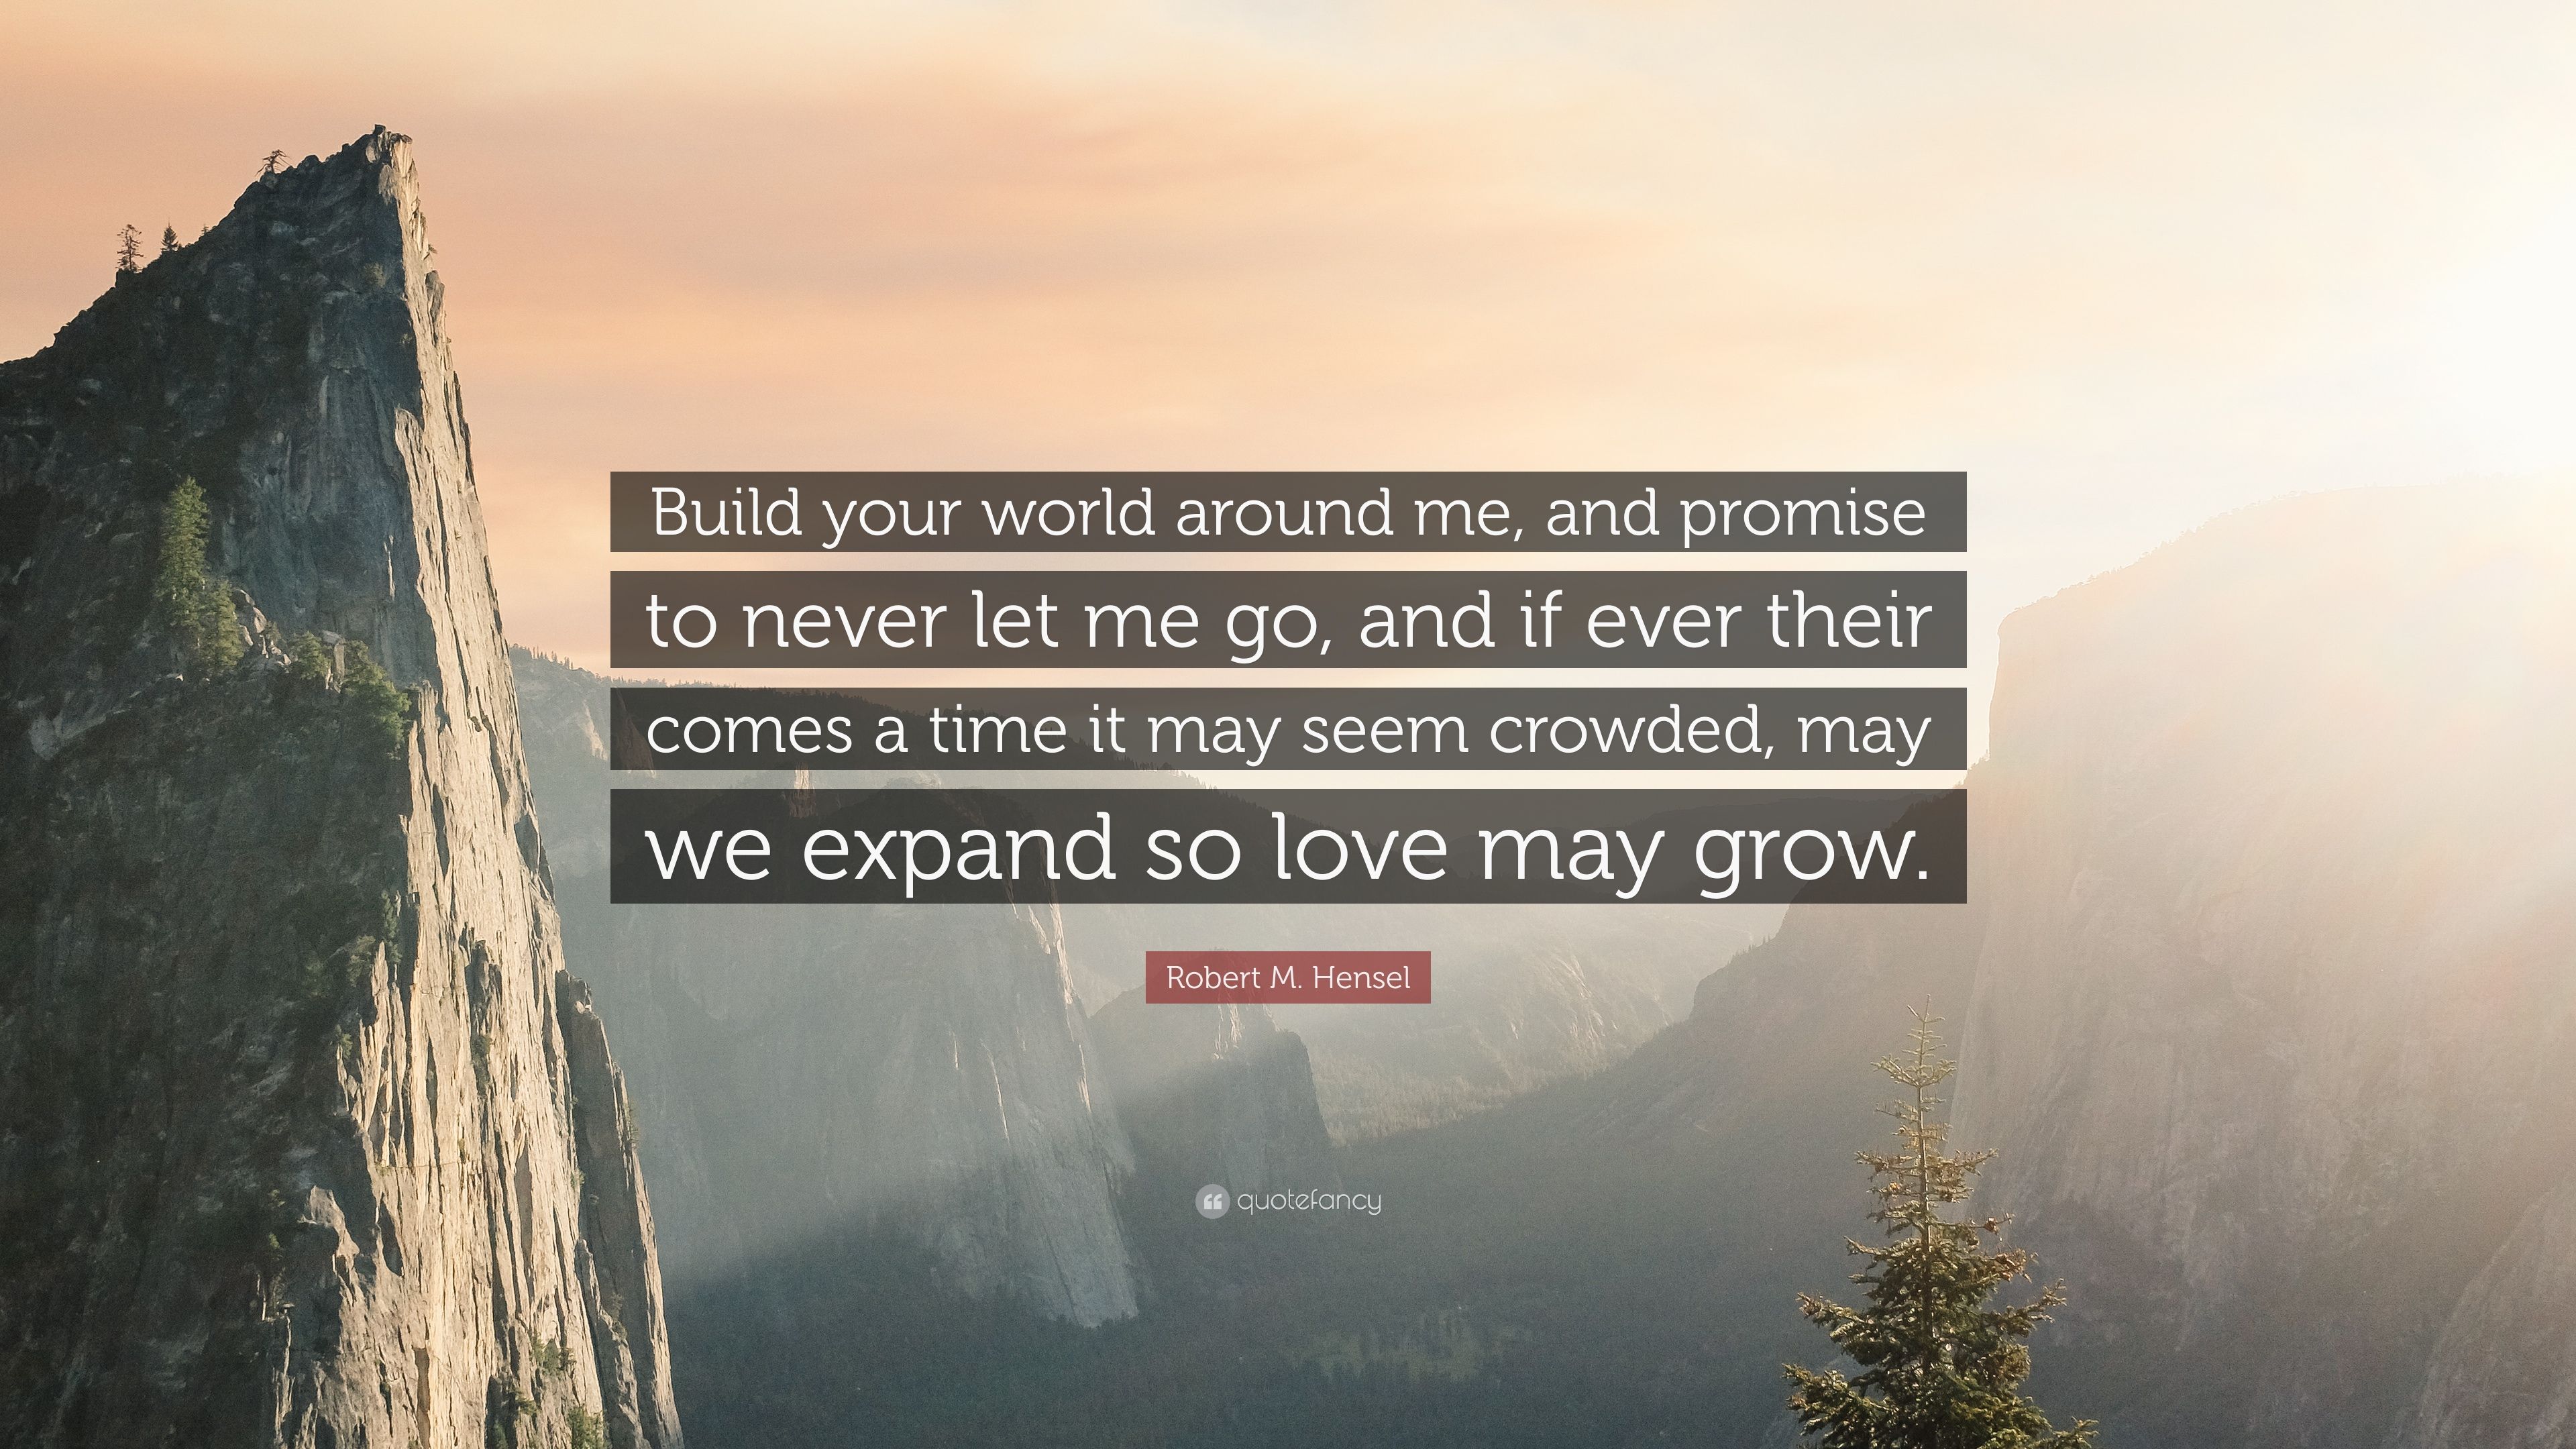 Robert M. Hensel Quote: “Build your world around me, and promise